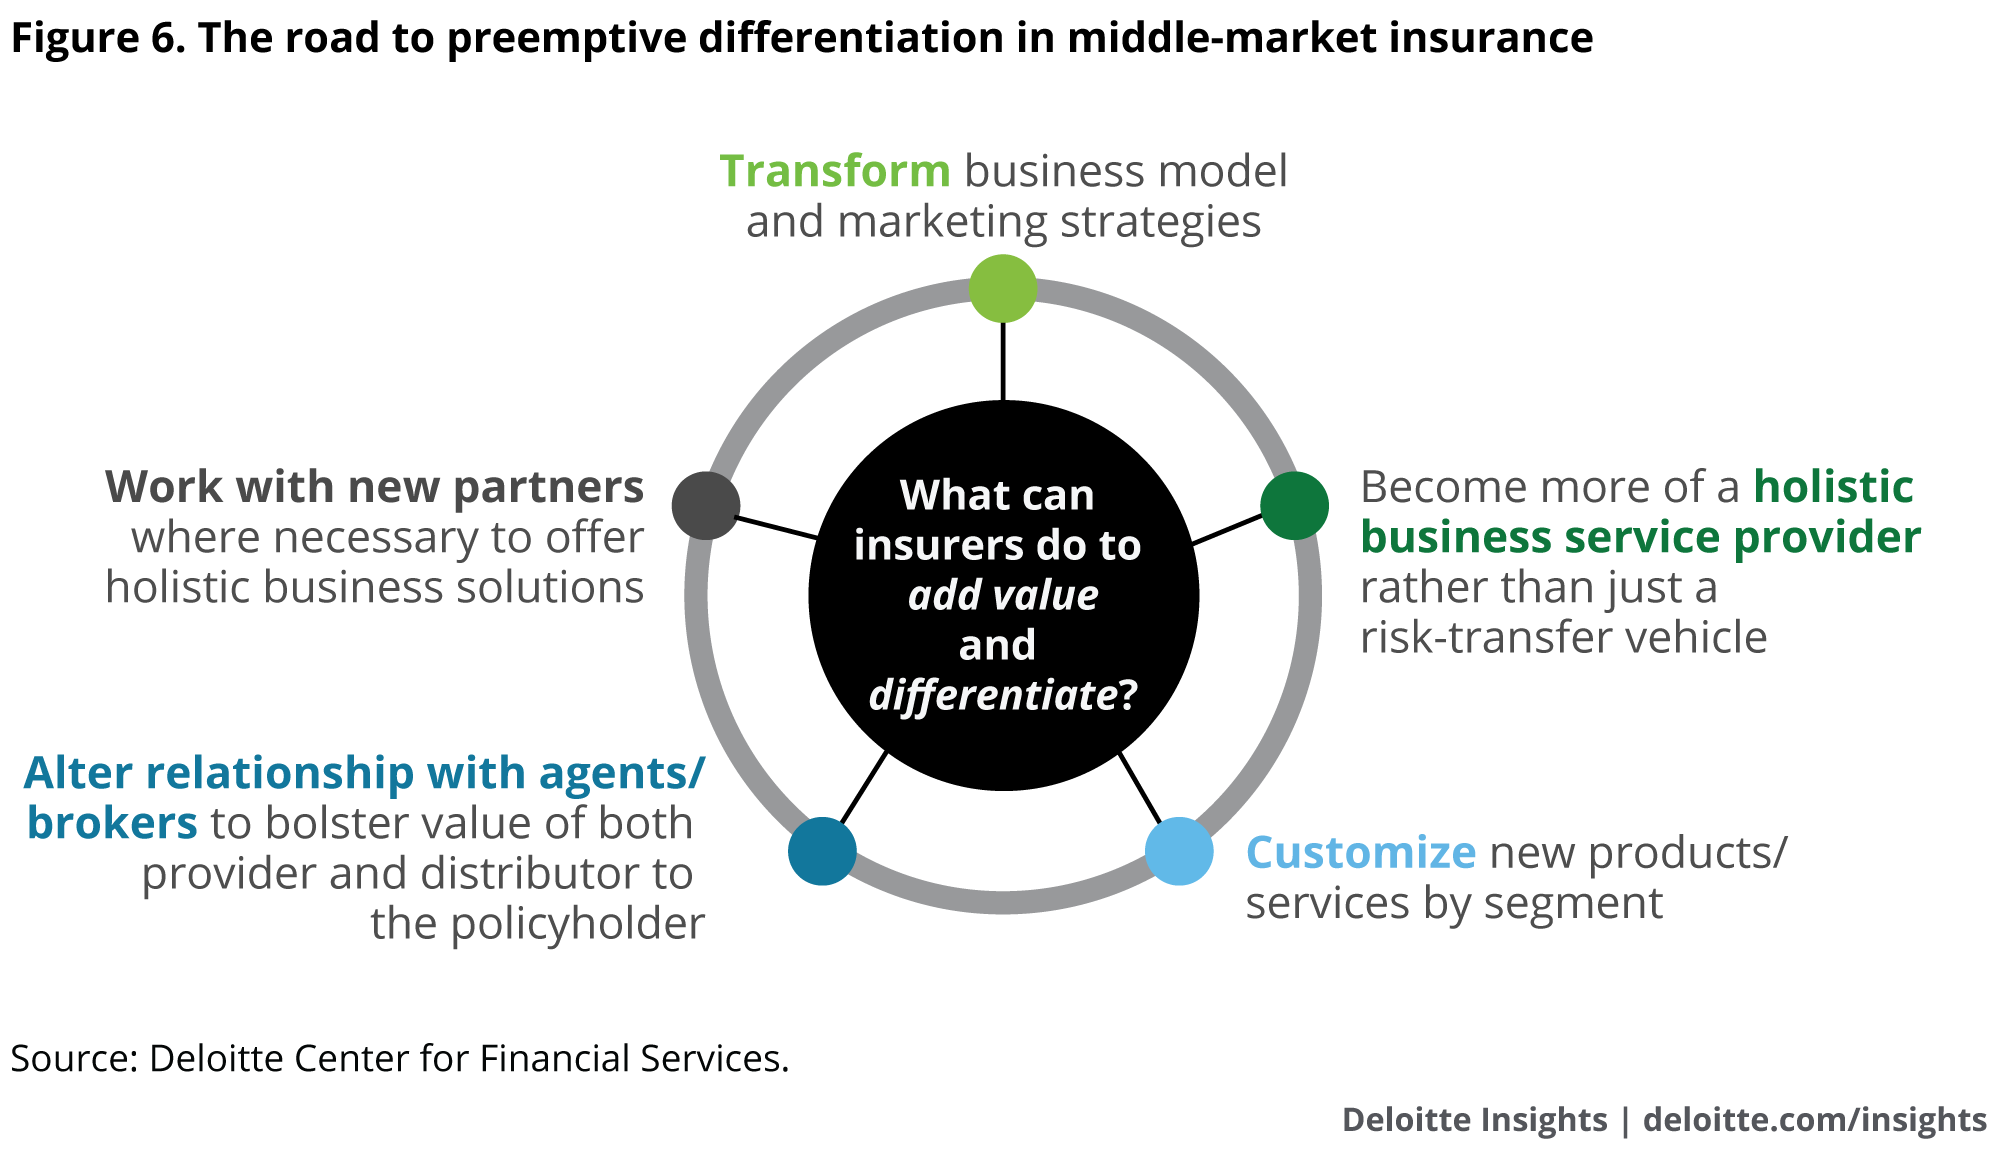 The road to preemptive differentiation in middle-market insurance